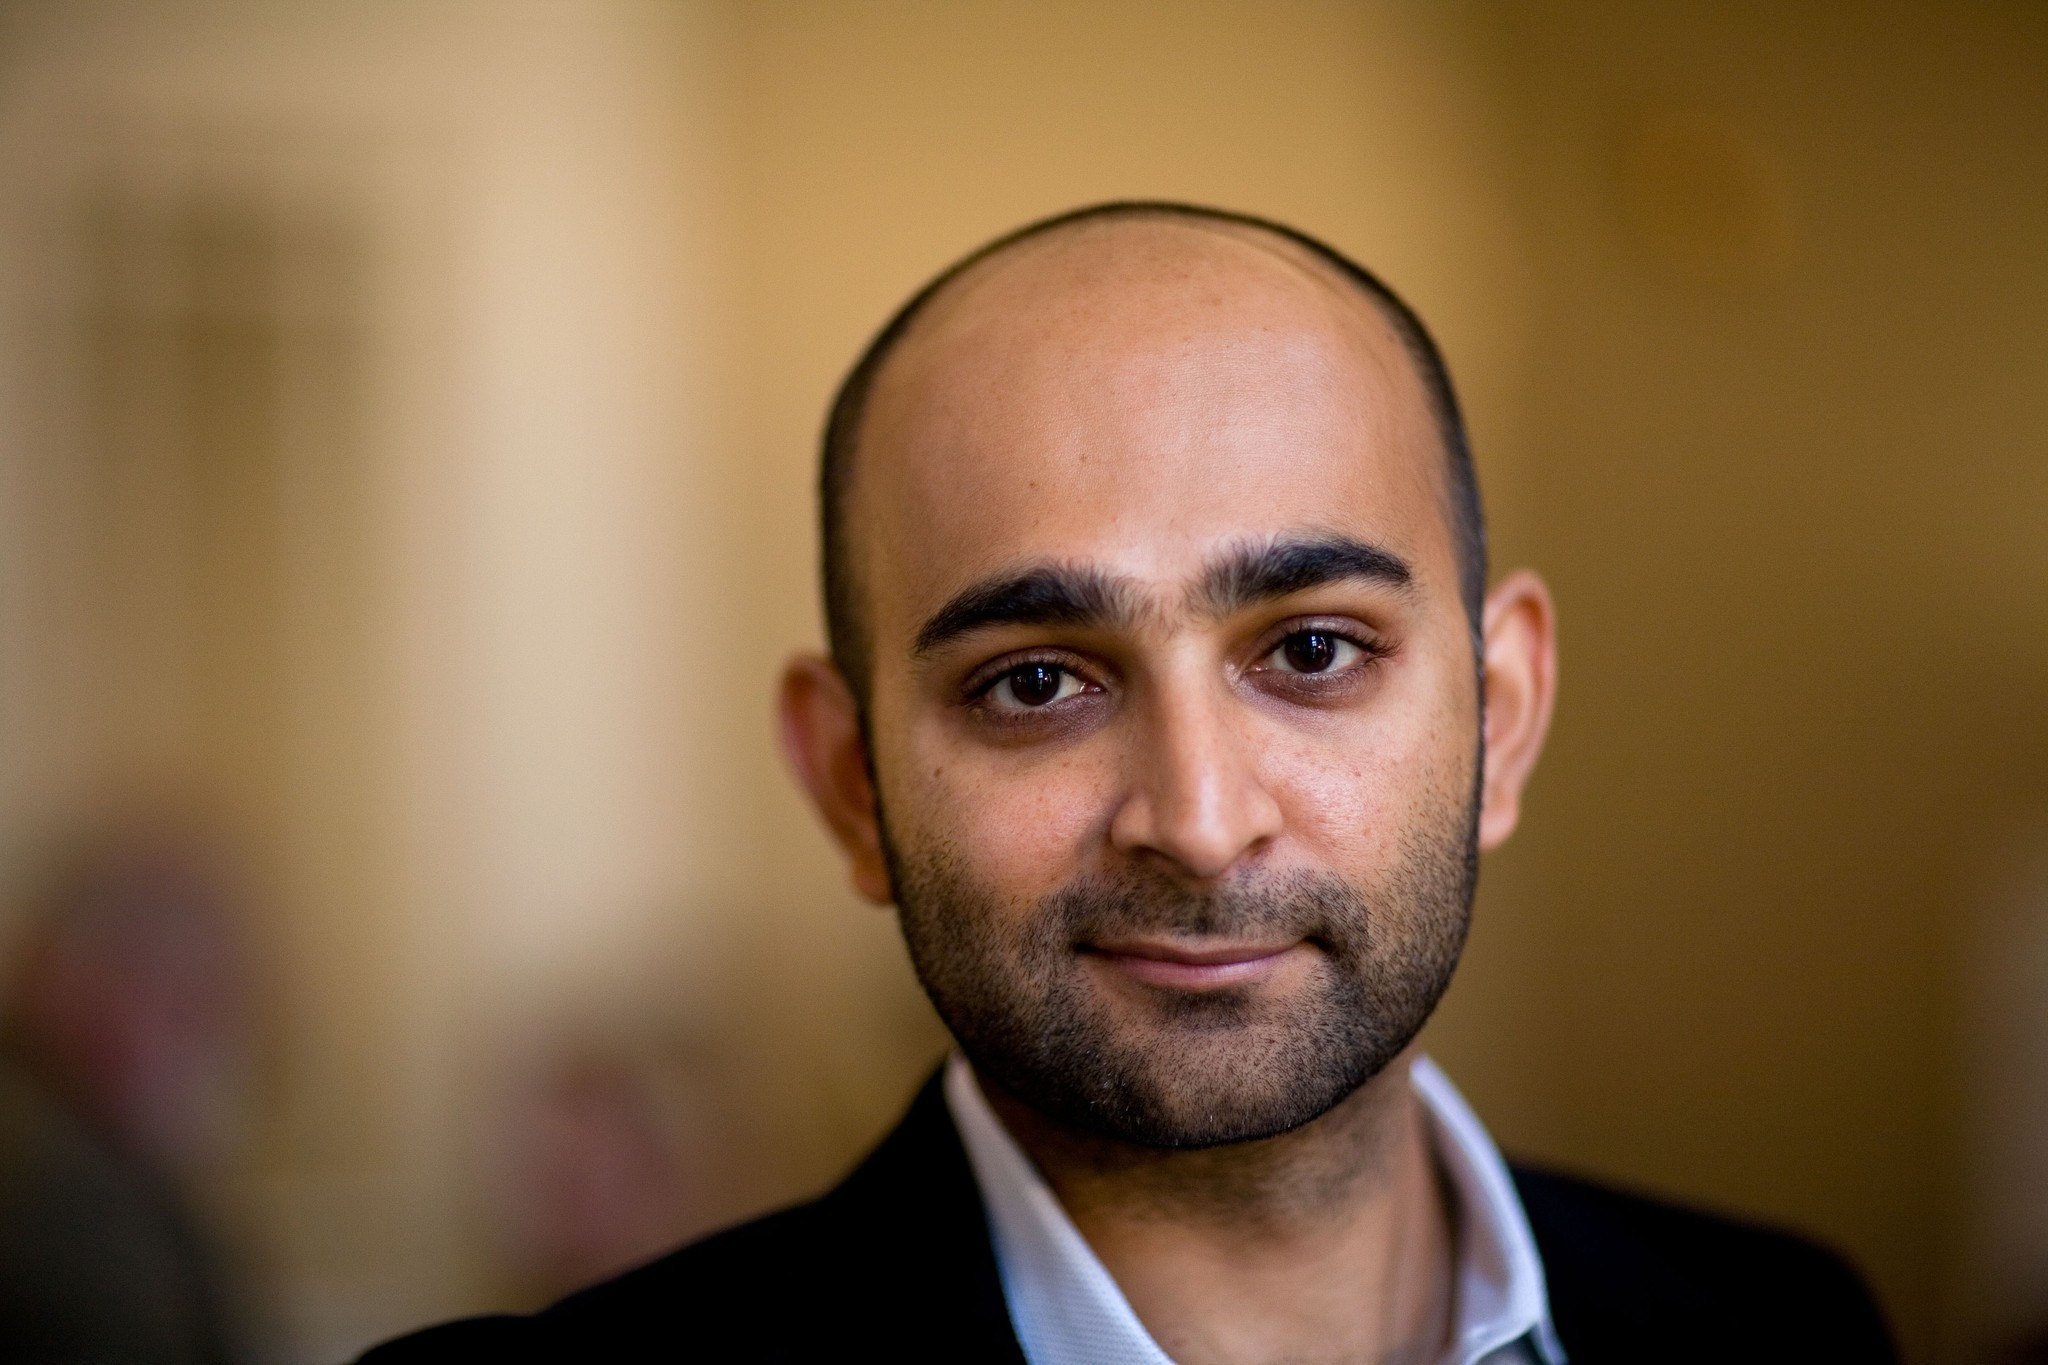 mohsin hamid how to get filthy rich in rising asia